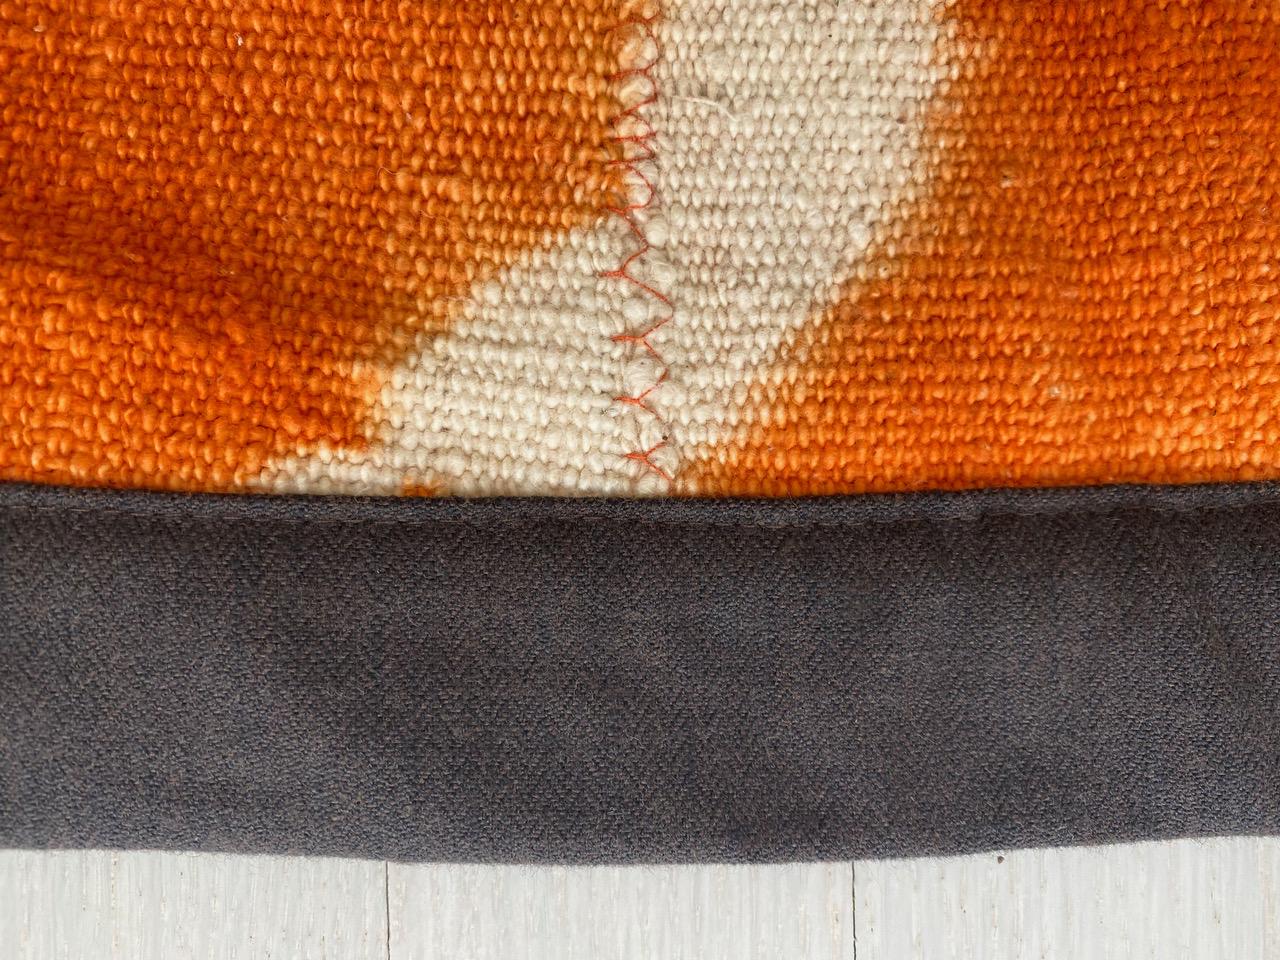 Vibrant burnt orange and ivory vegetable dyed African textile. We added a chocolate brown linen border. Great on a sofa, bed or a wall hanging. This textile can also be used as a rug with a rug pad.

Andrianna Shamaris. The Leader in Modern